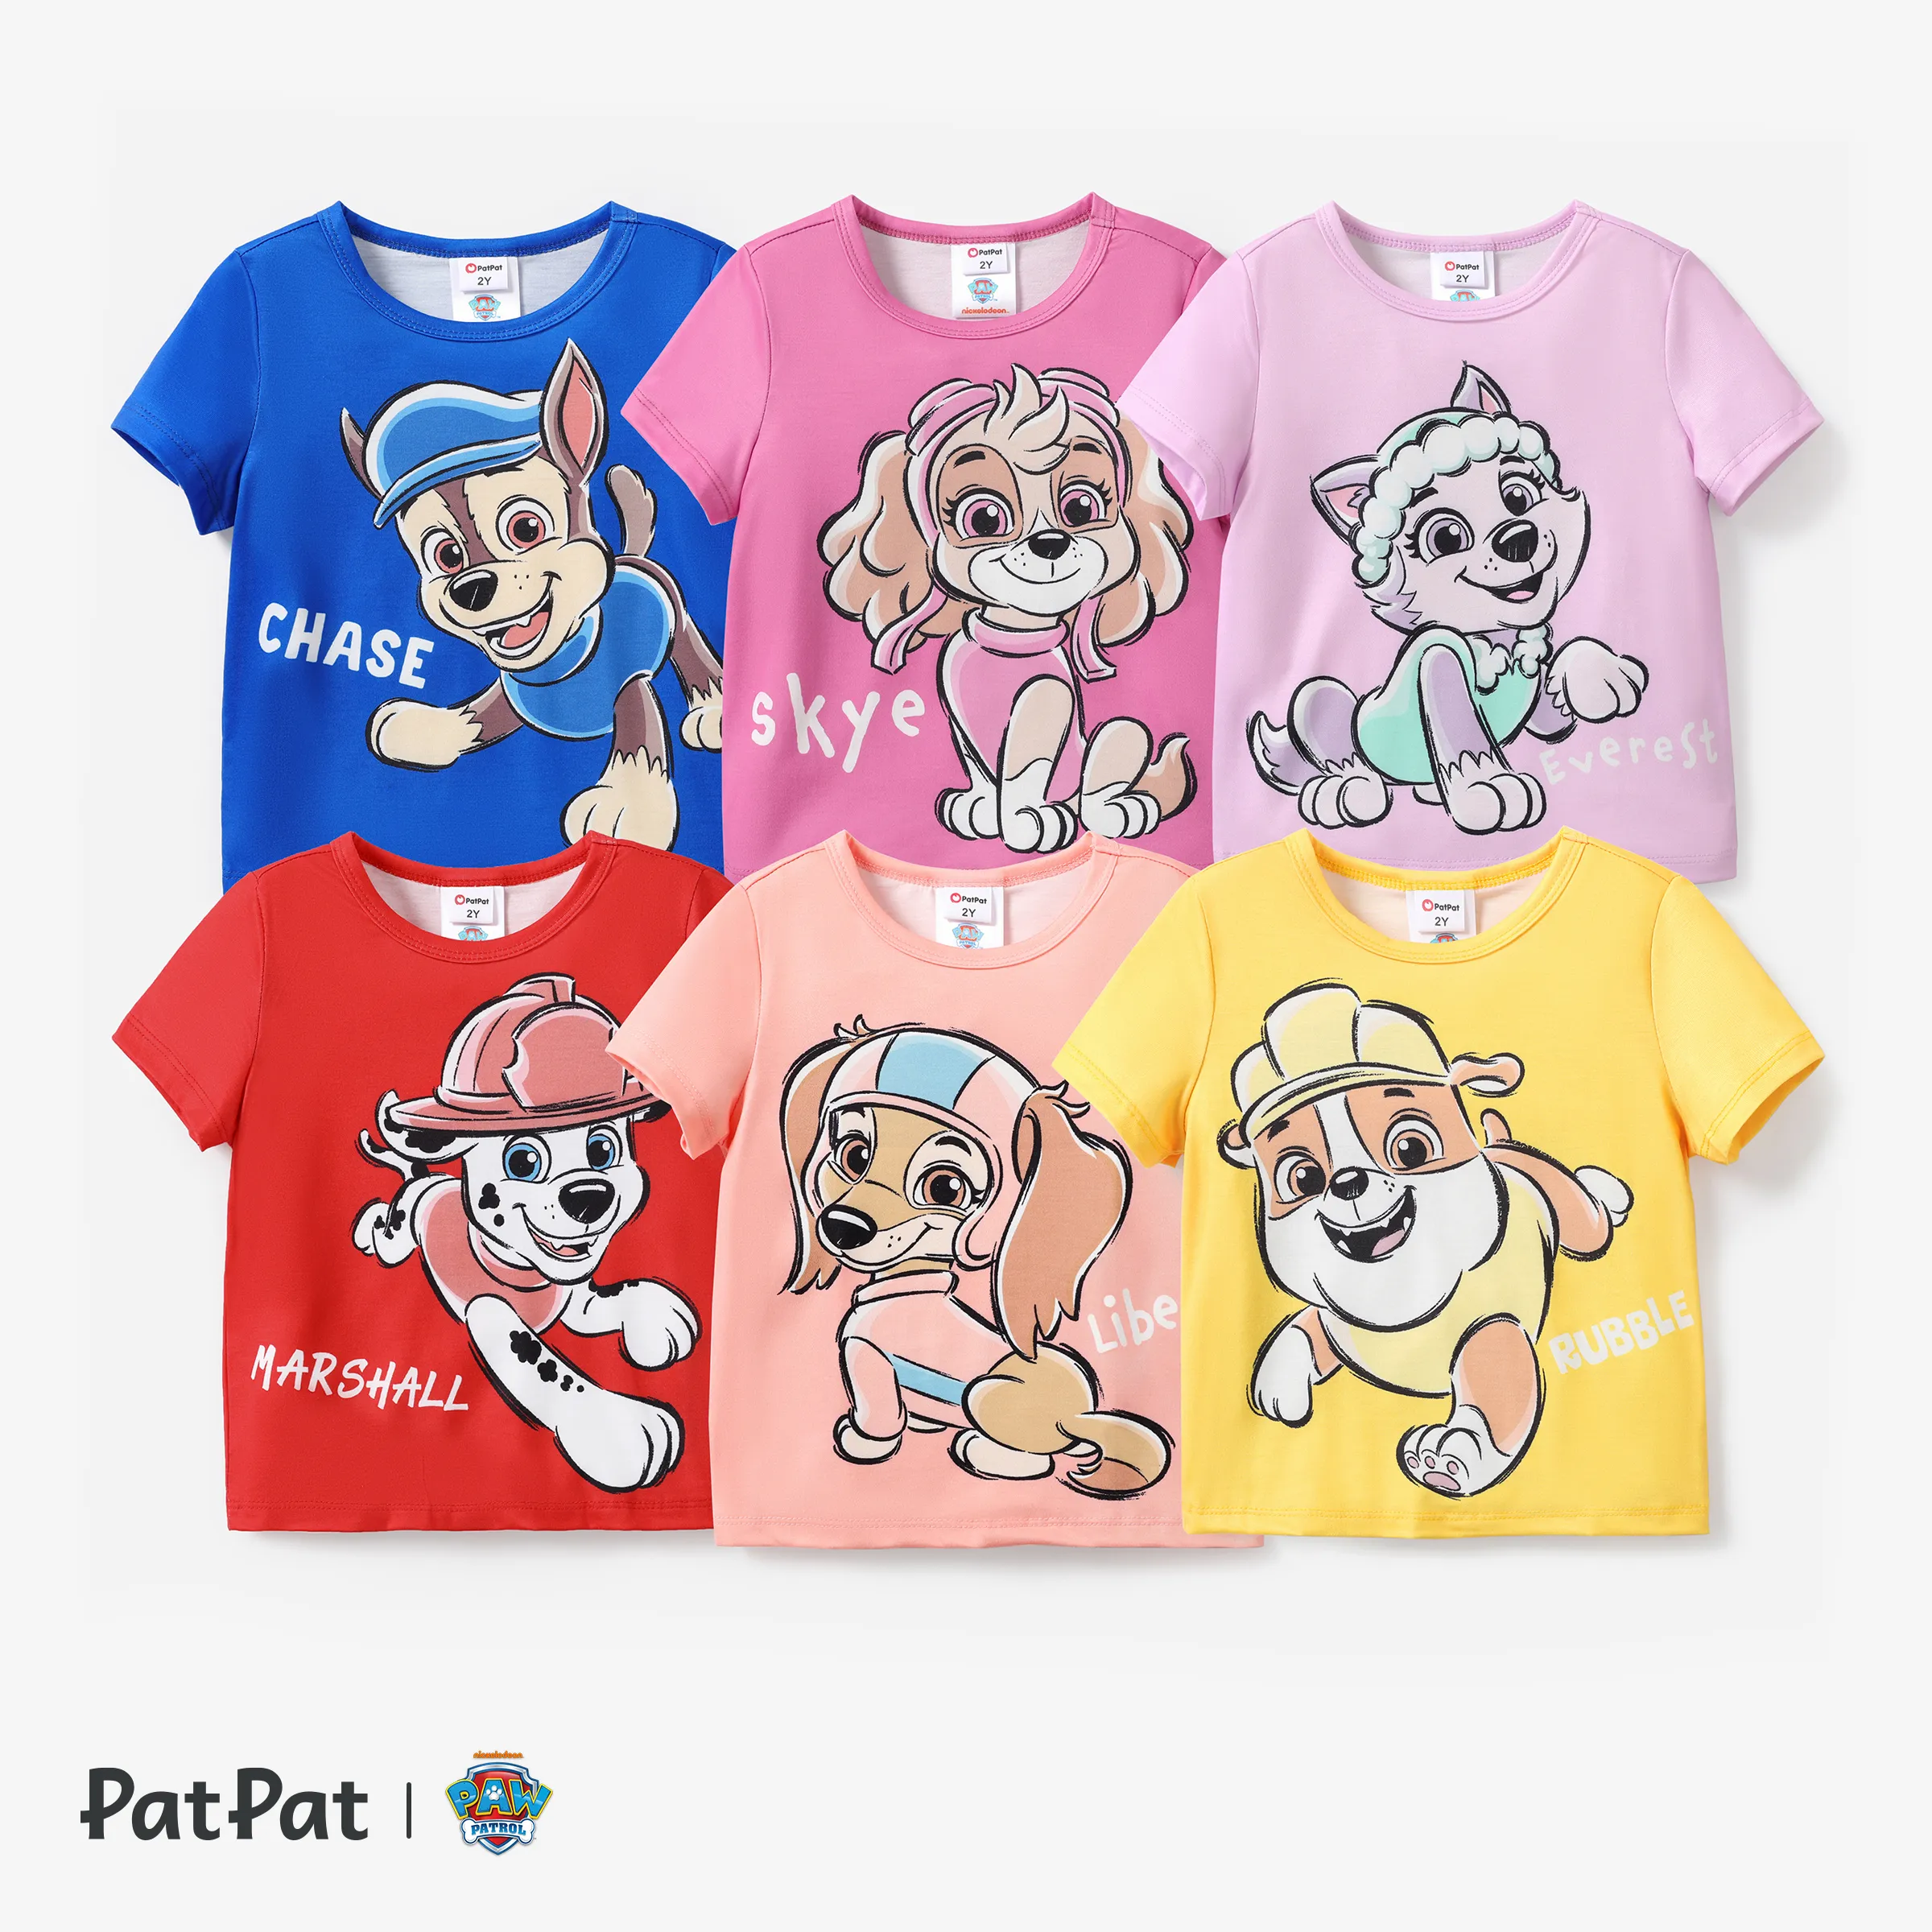 PAW Patrol Toddler Boy/Toddler Girl Positioned Printed Graphic T-shirt